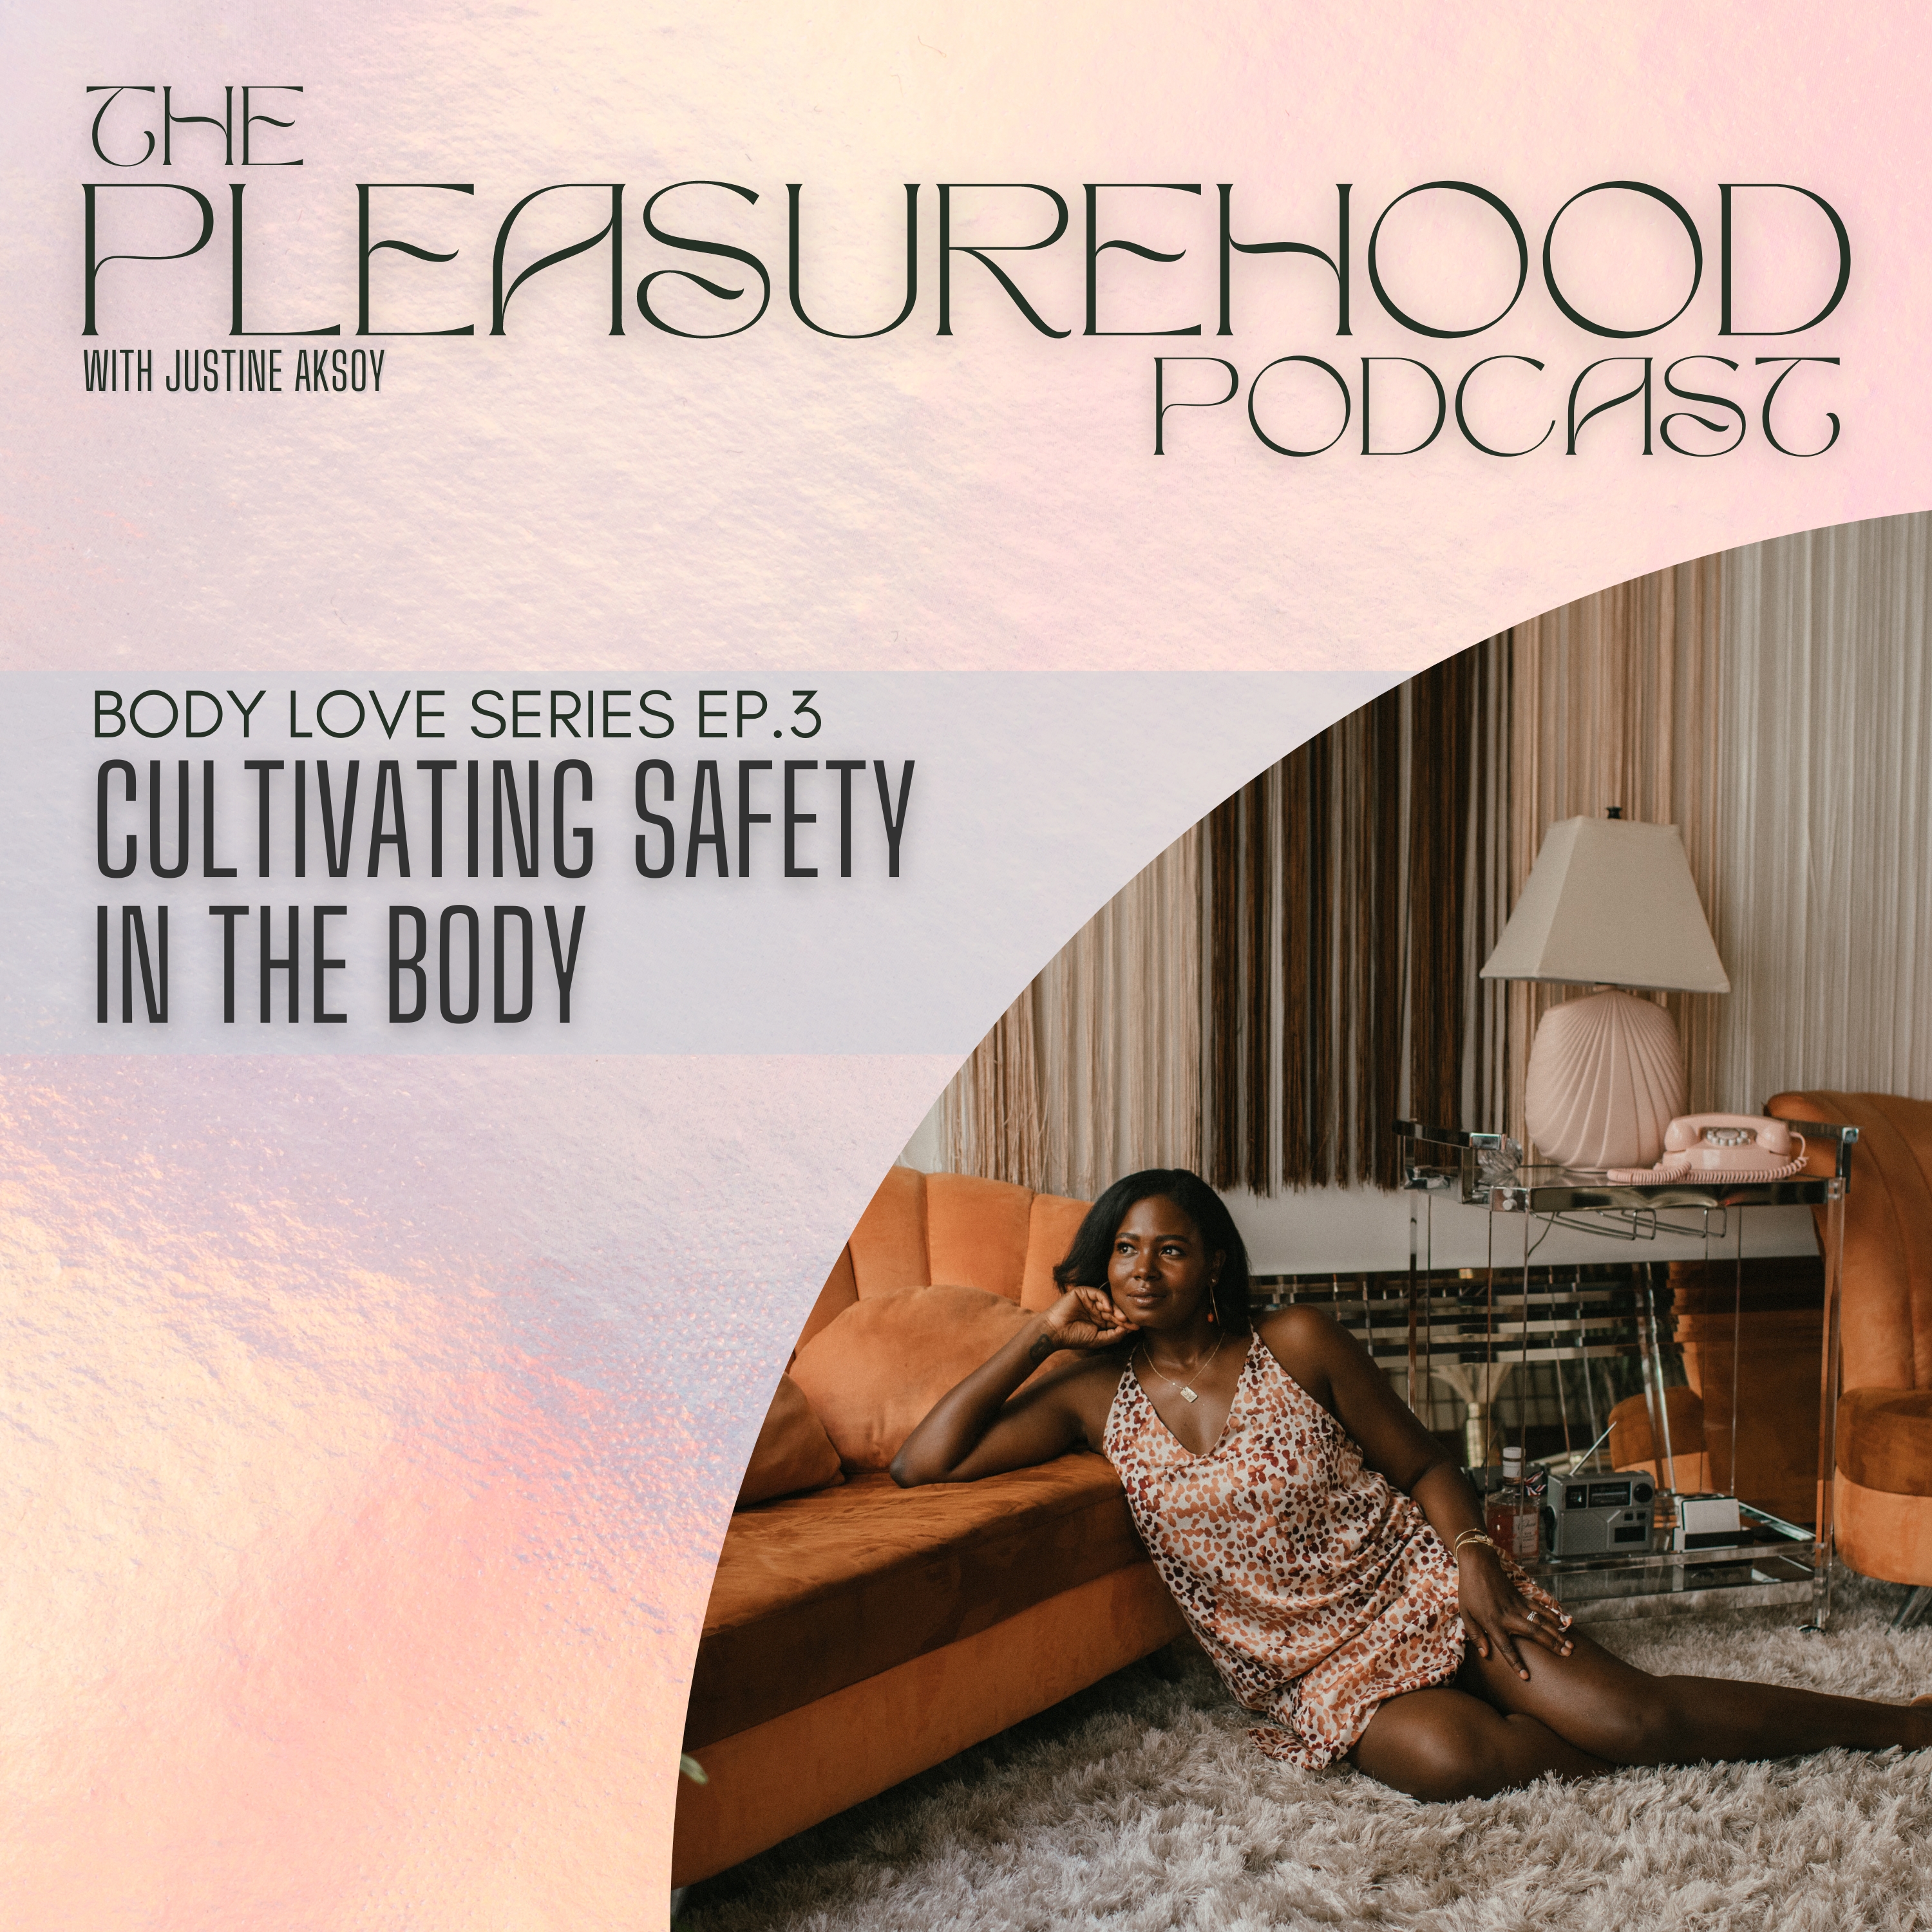 Body Love Series Episode 3: Cultivating Safety in the Body